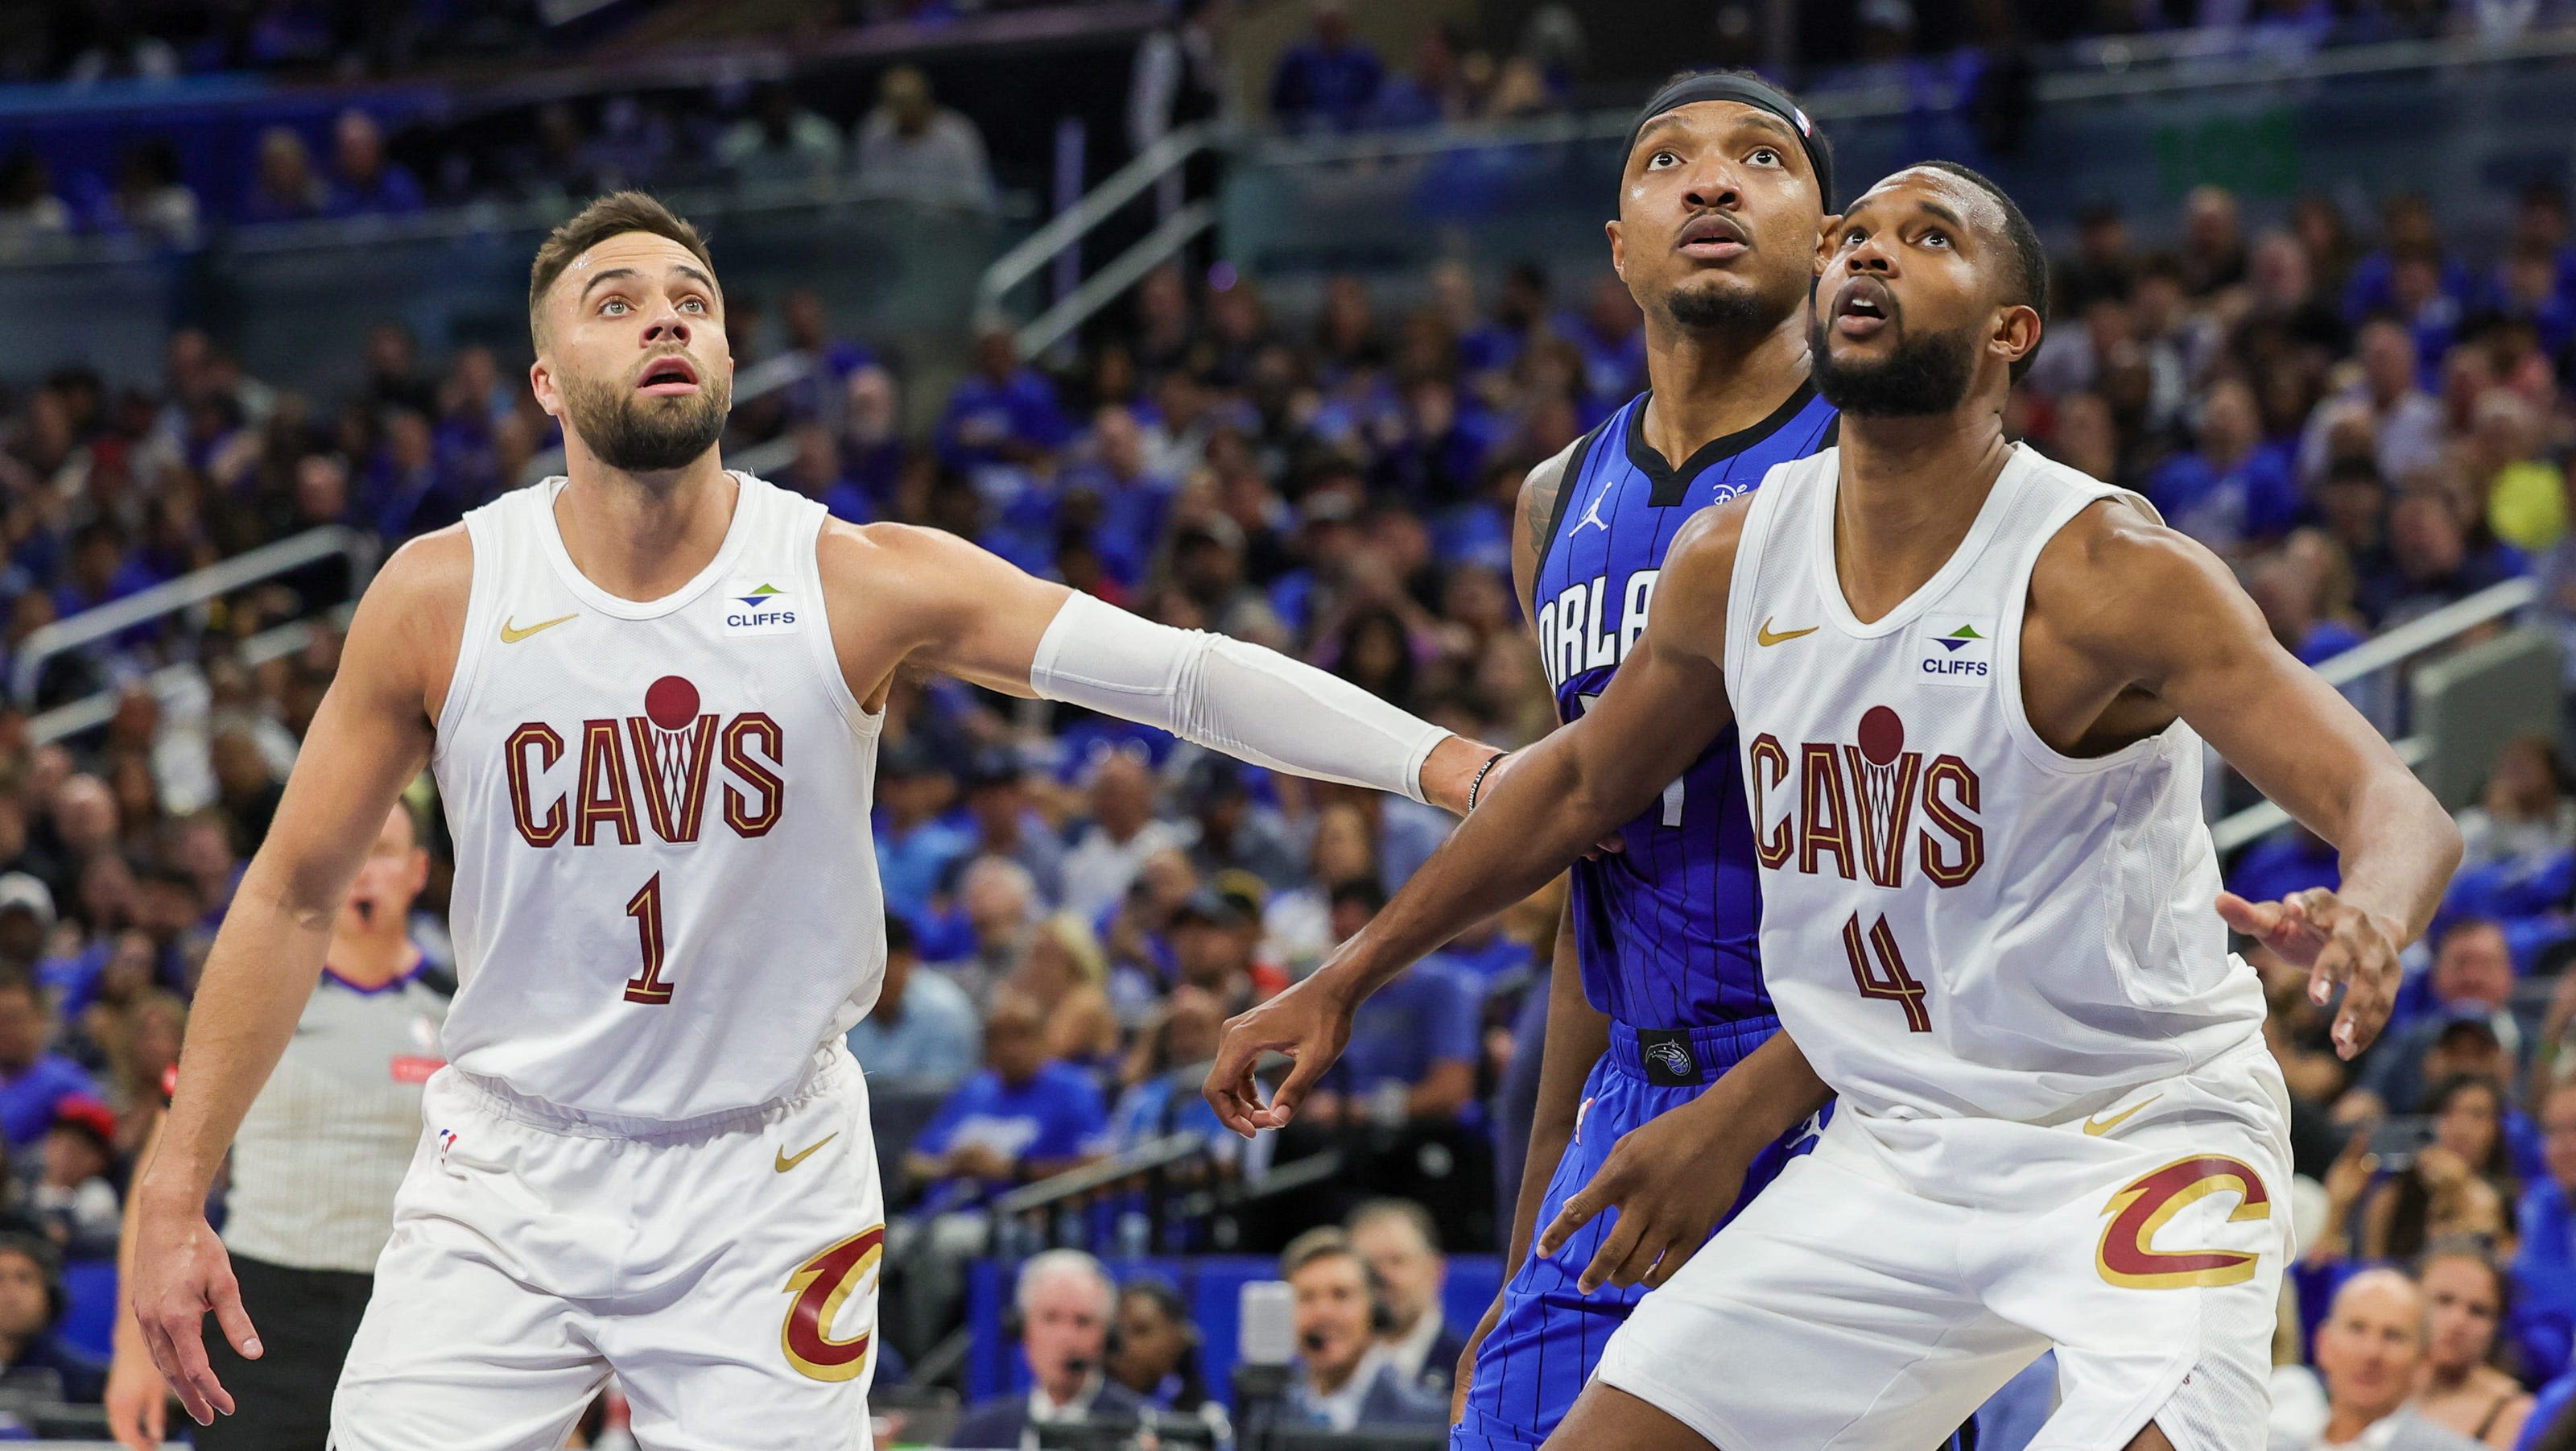 Cleveland Cavaliers vs Orlando Magic prediction: Who will win Game 7 in NBA playoffs?